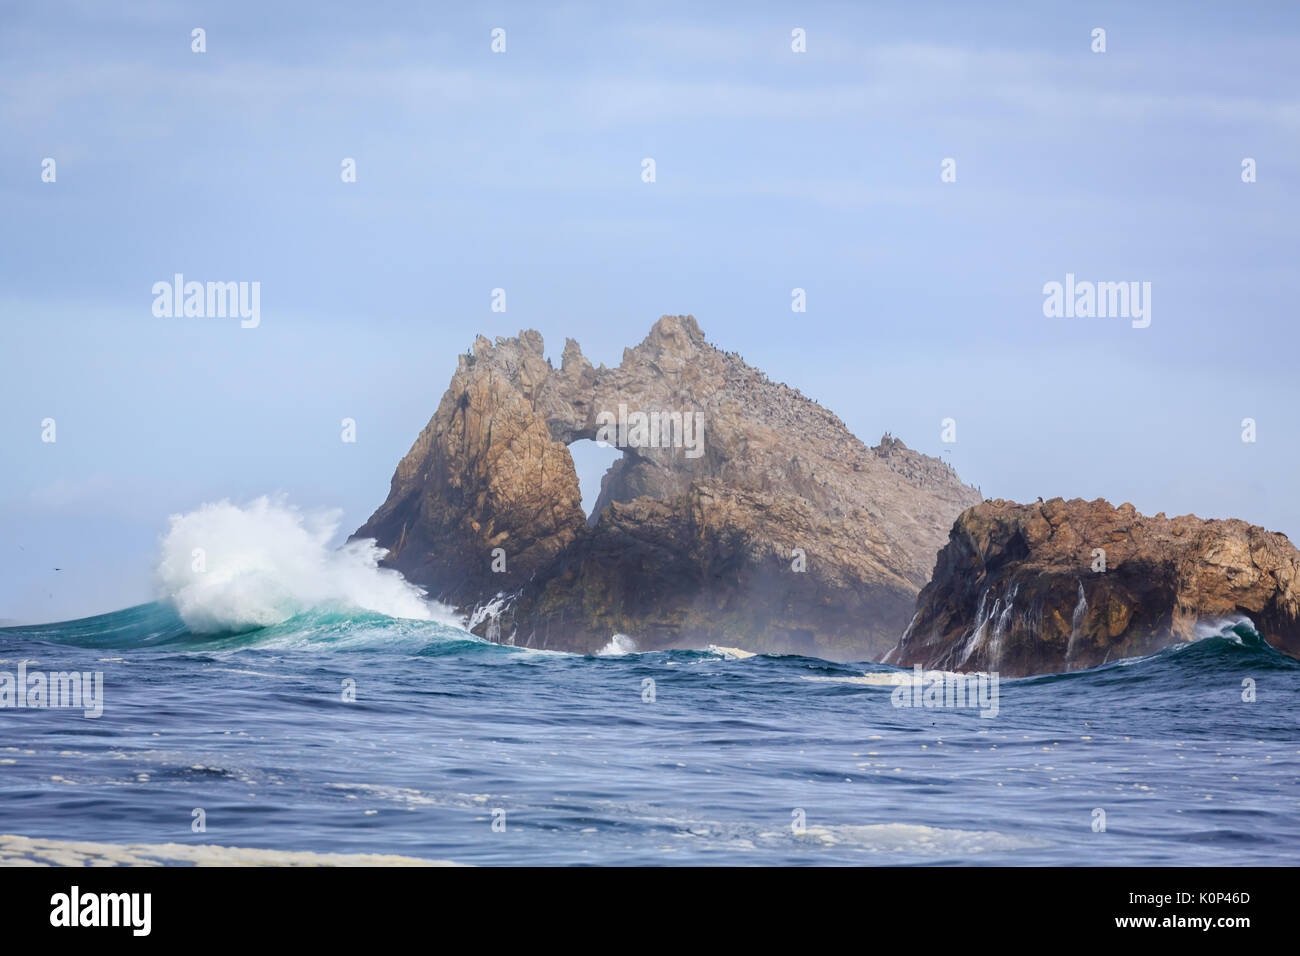 Waves crash on Farallon Islands sea stack with keyhole off coast of San Francisco in the Gulf of Farallon on a sunny, clear day Stock Photo